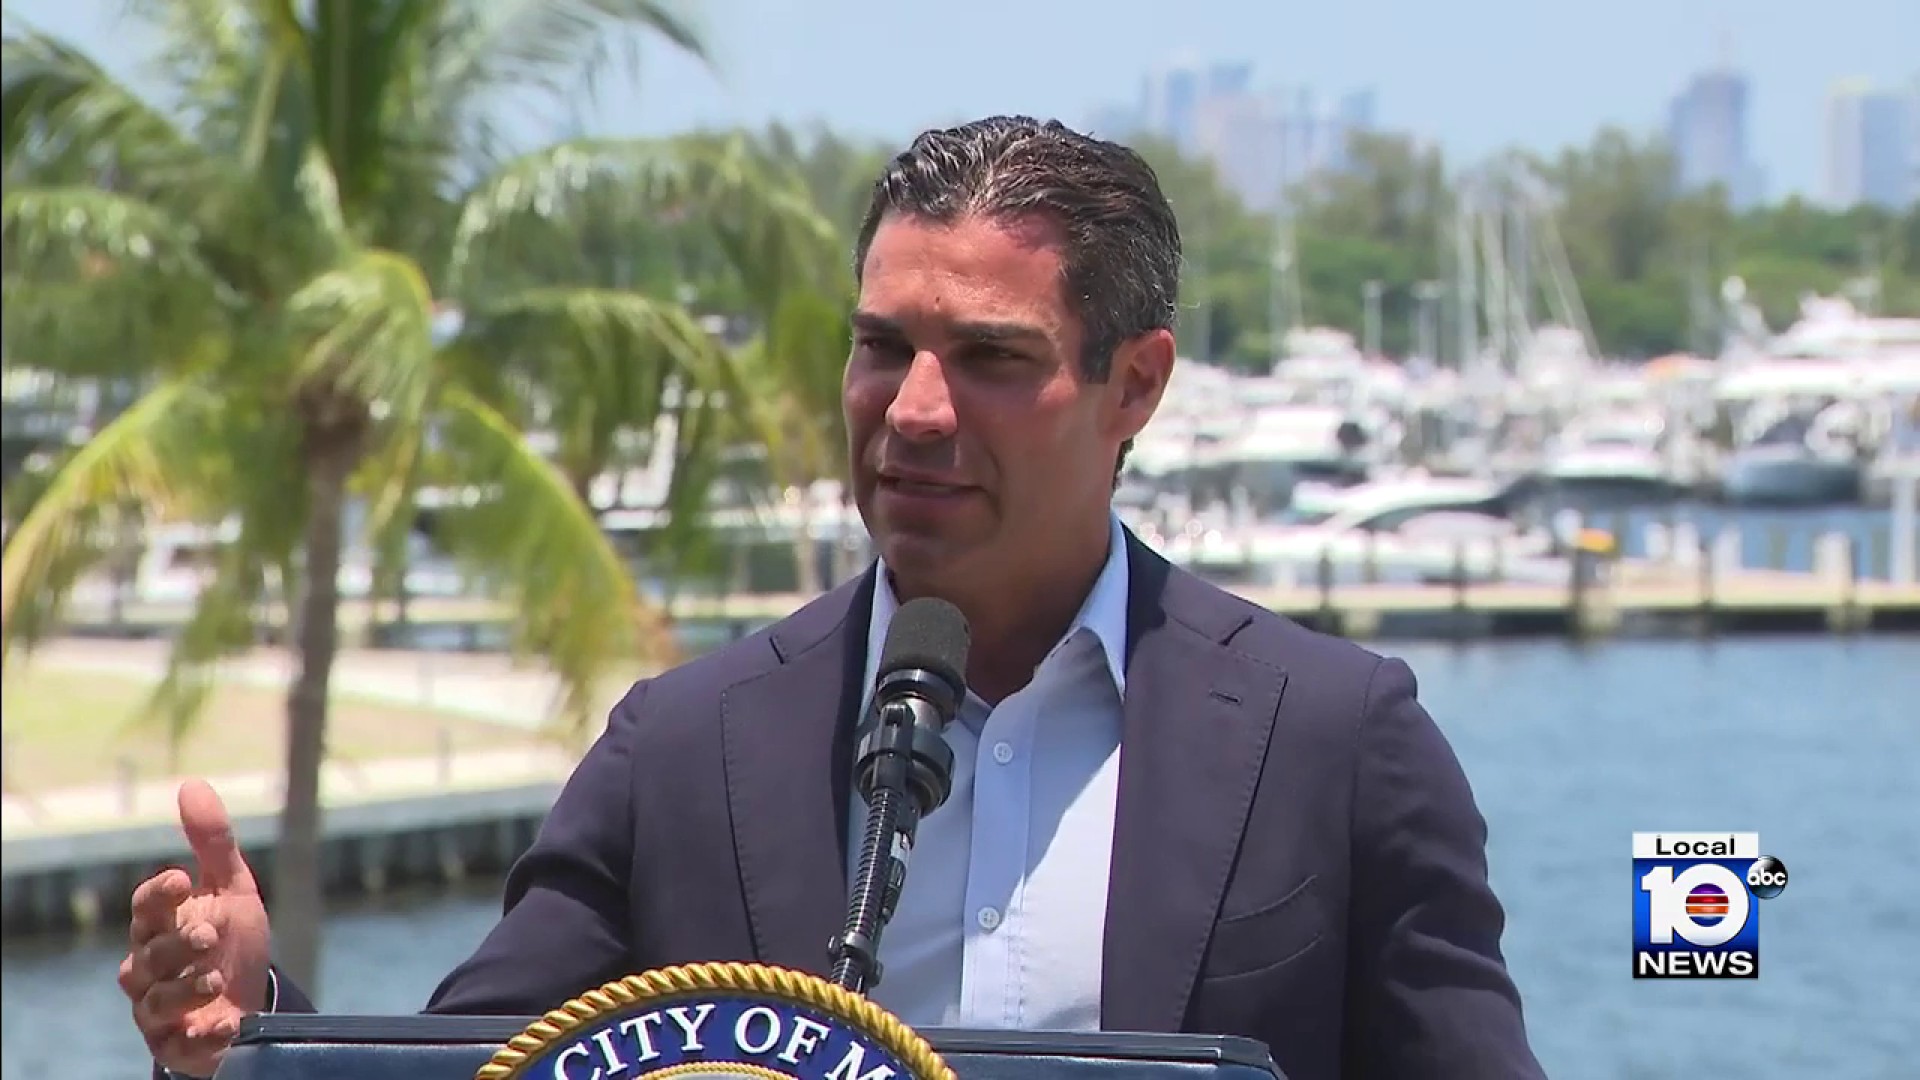 local10.com - Roy Ramos - Miami mayor welcomes buy now, pay later fintech Zilch to Brickell